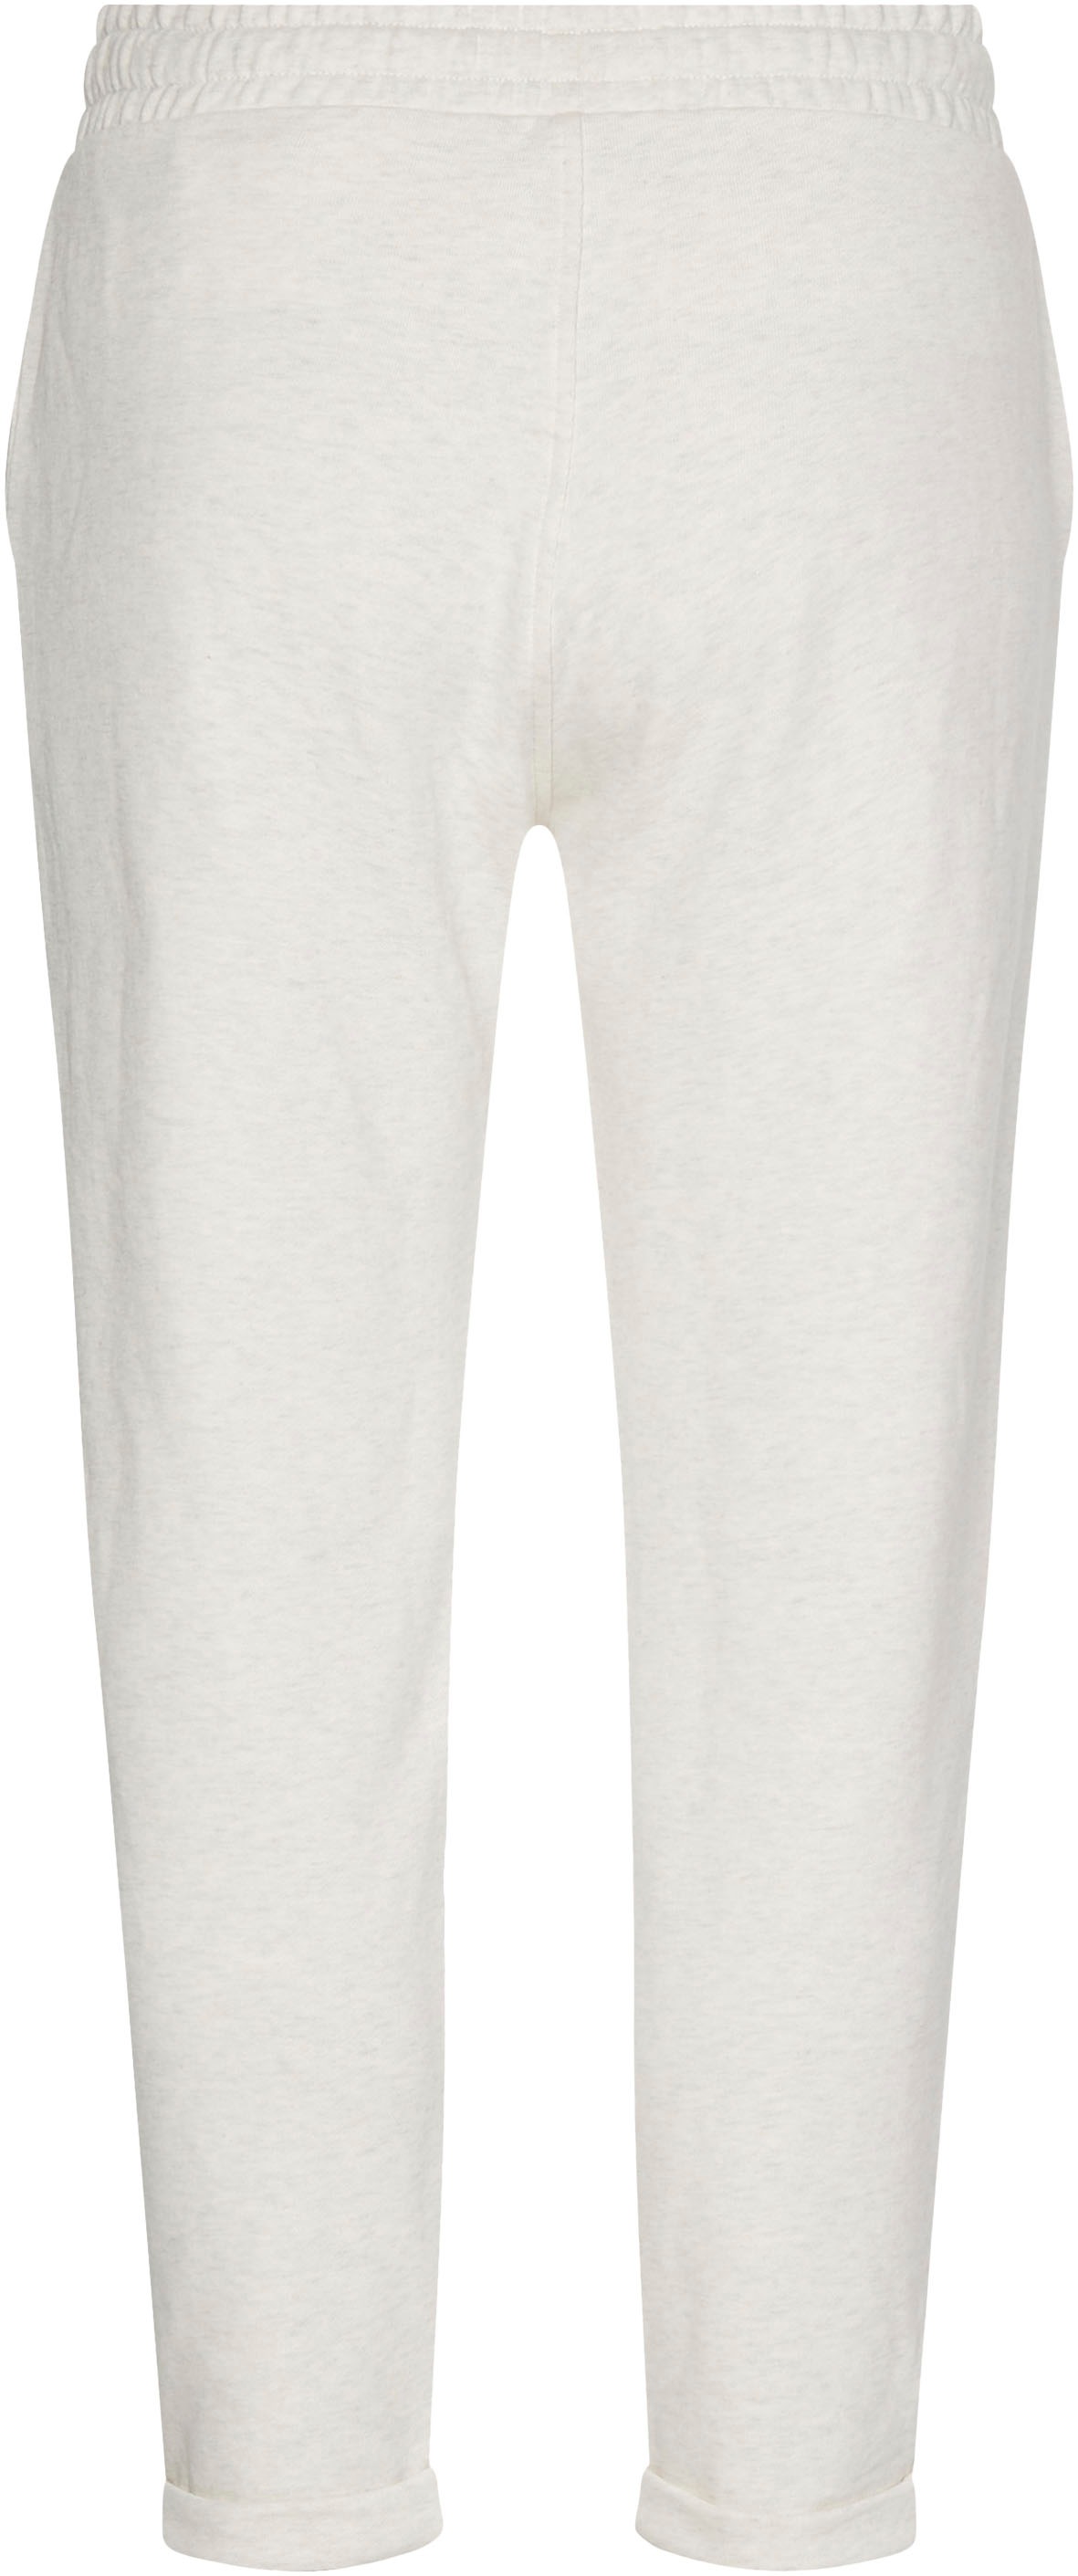 Tommy Hilfiger Sweatpants »TAPERED NYC ROUNDALL SWEATPANTS«, mit Tommy  Hilfiger Markenlabel kaufen im OTTO Online Shop